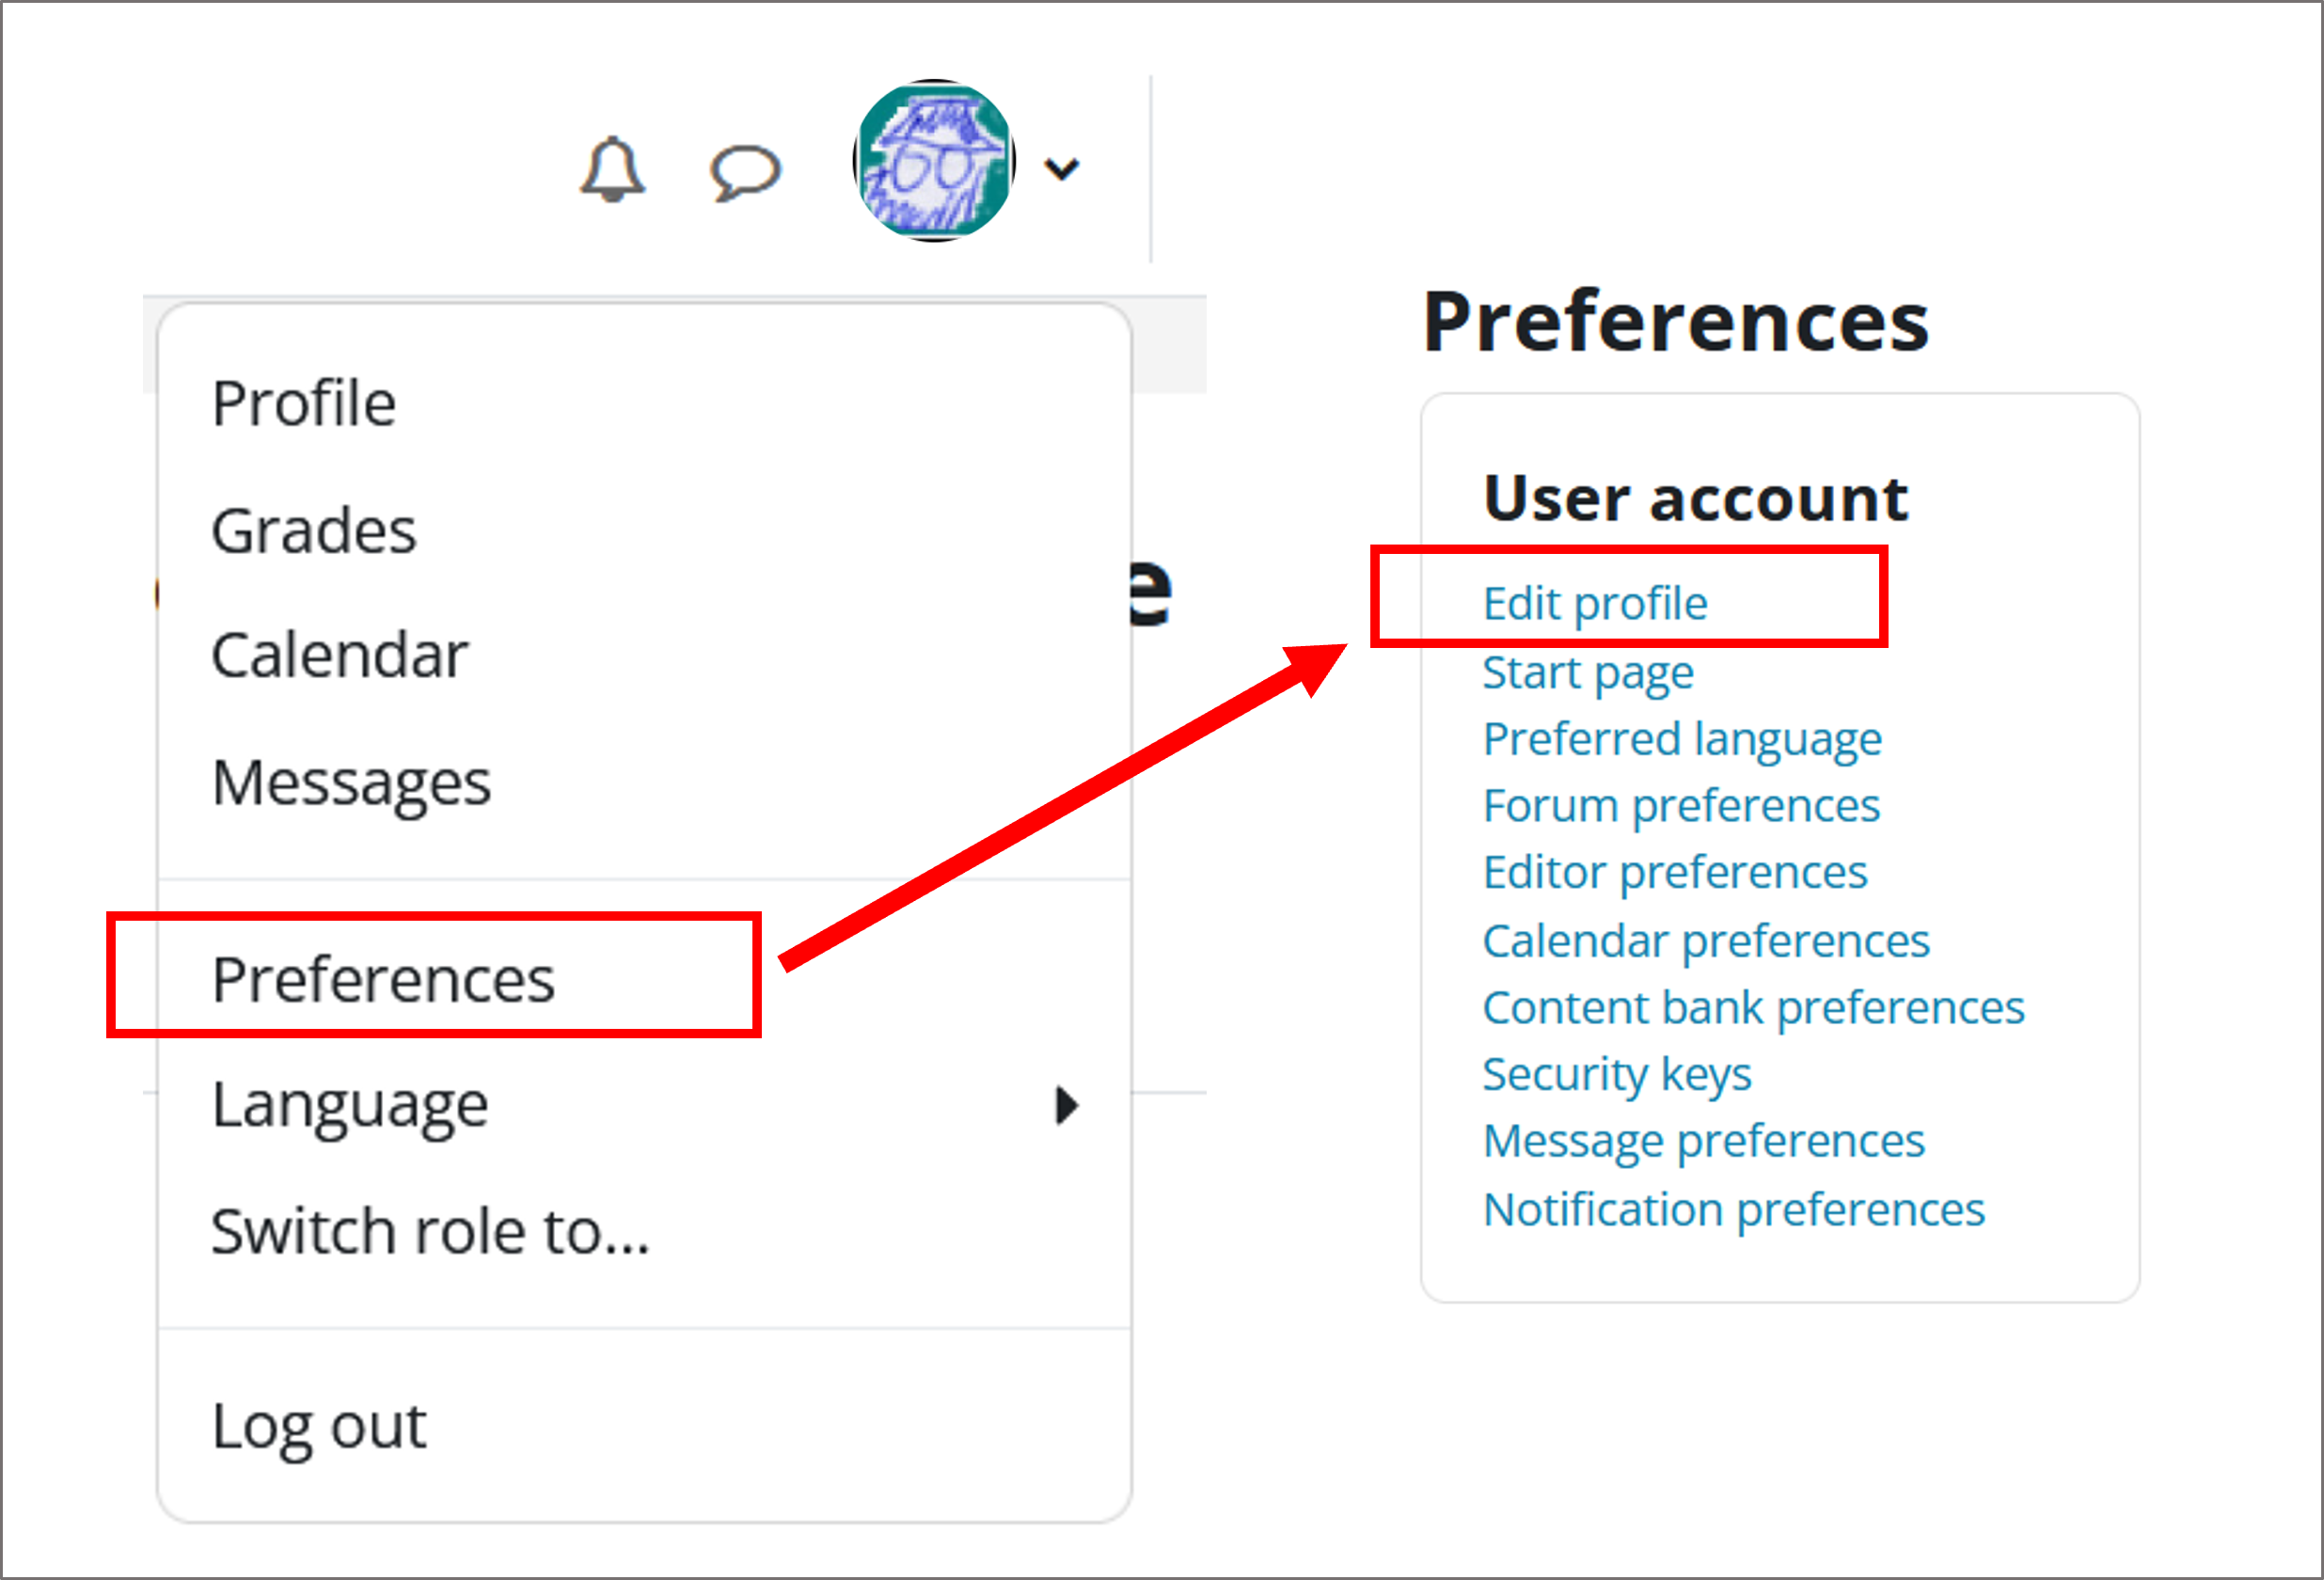 Picture: Preferences in Moodle